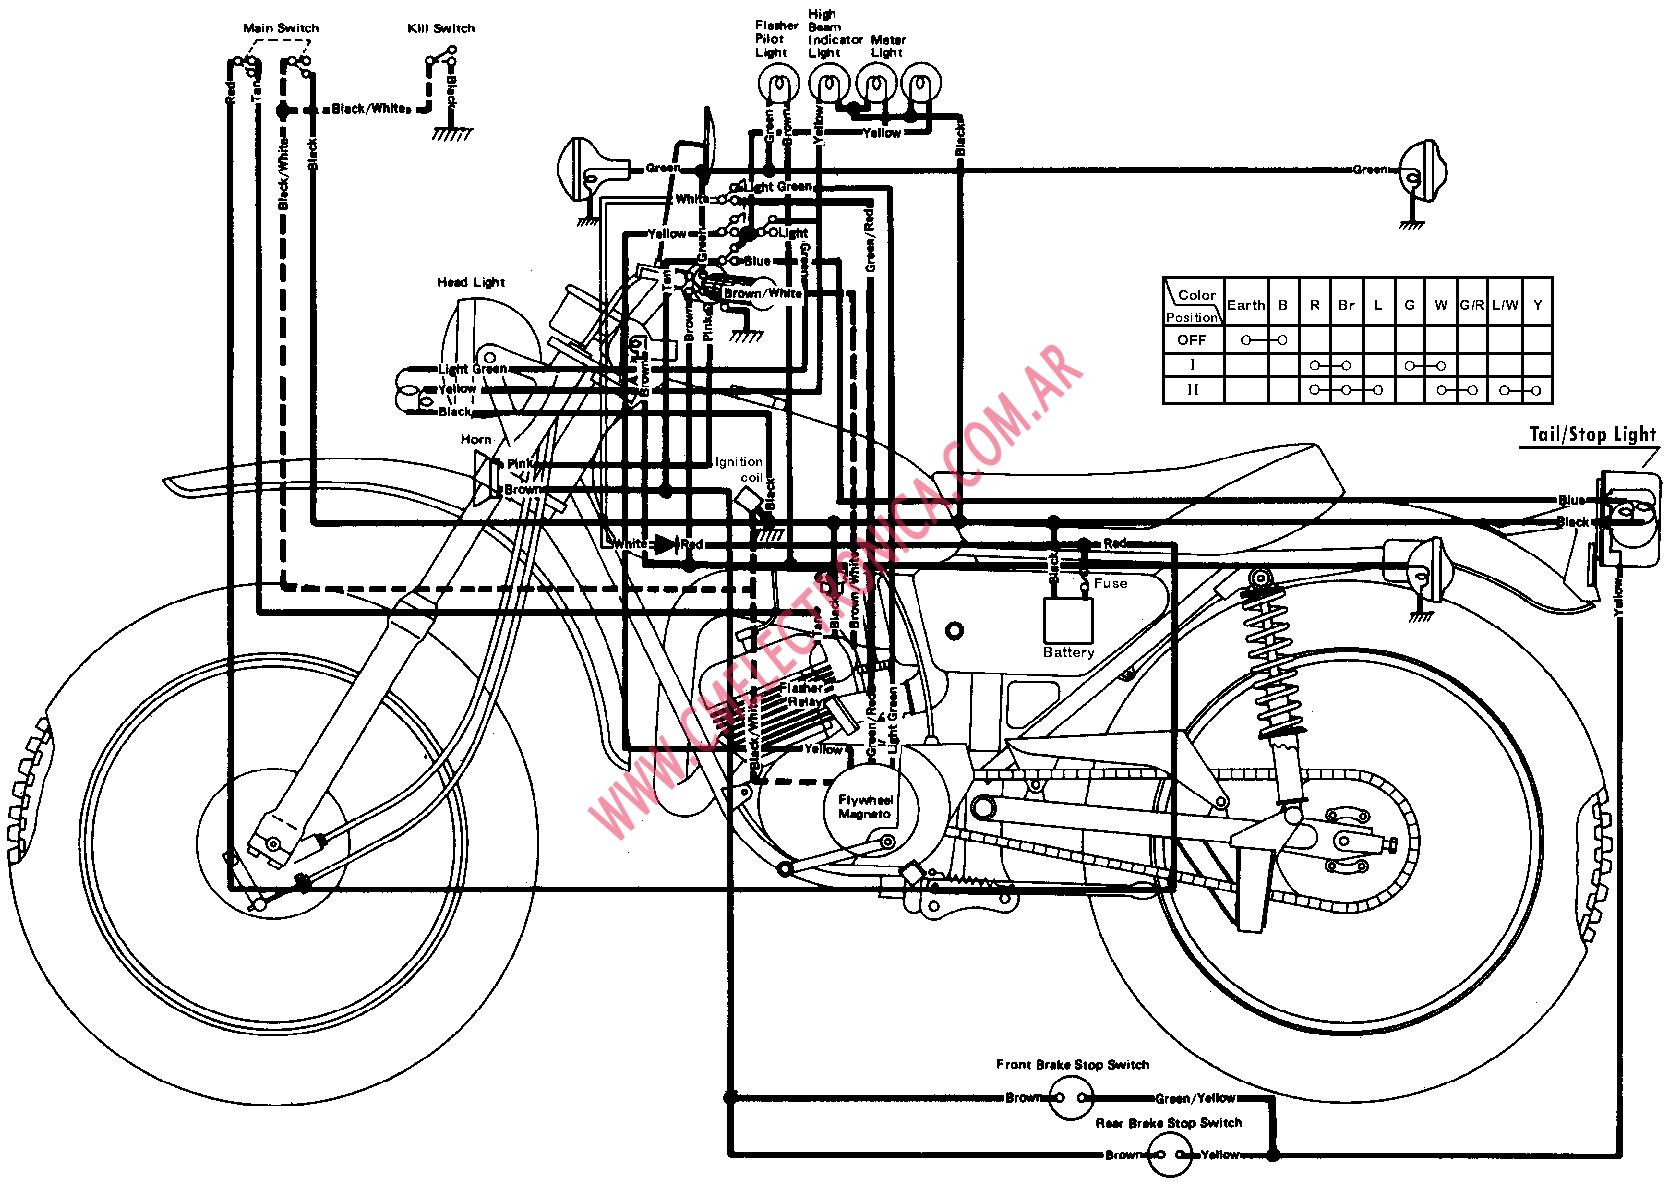 1995 Yamaha Scooter Wiring Diagram Schematic